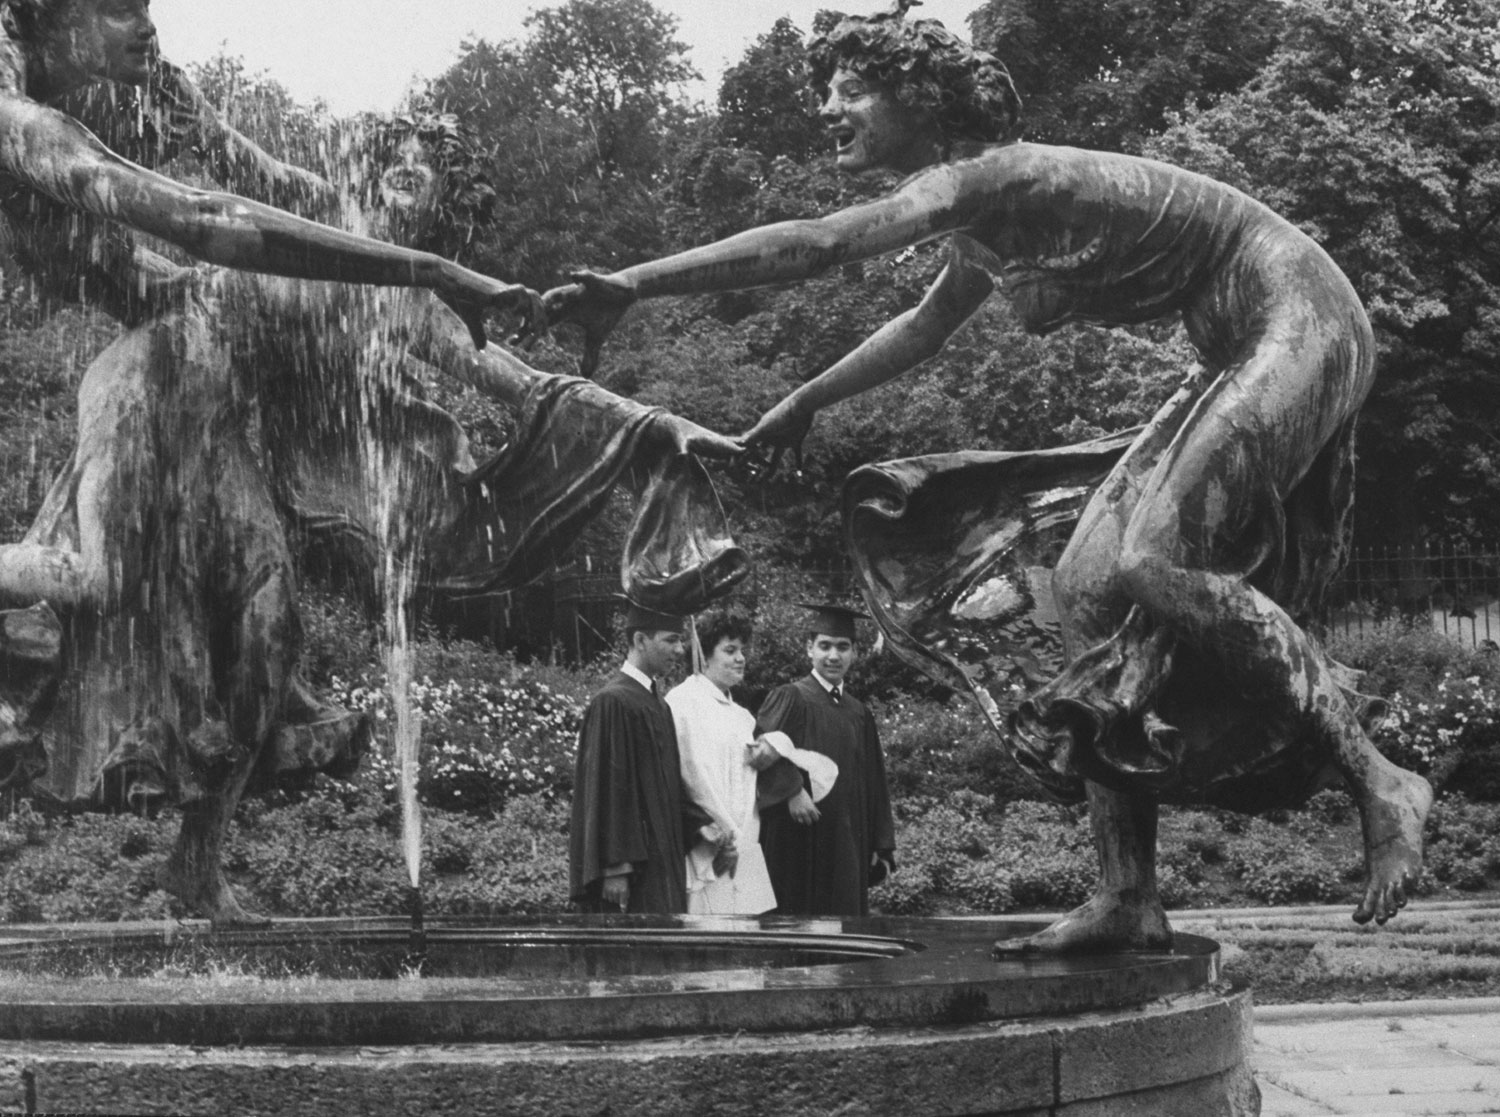 A trio of newly graduated students strolls soberly past a trio of figures dancing ring-around-a-rosy at a fountain.